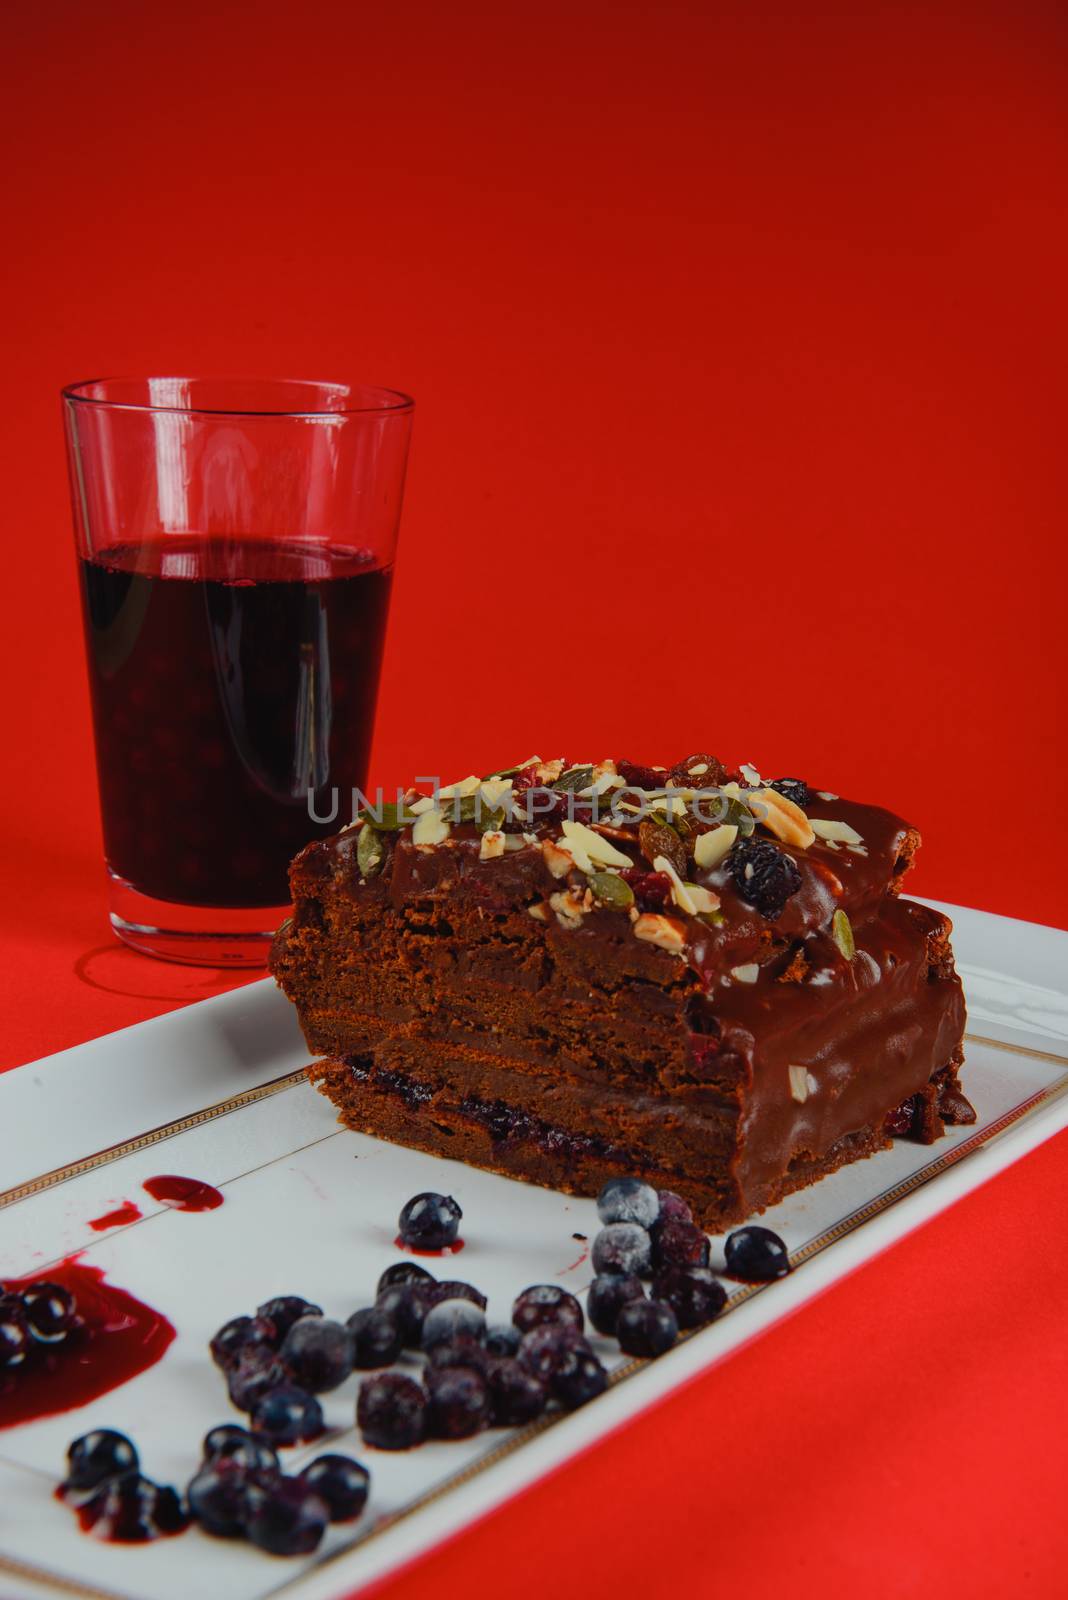 Chocolate cake with raisins lies on the table by Brejeq